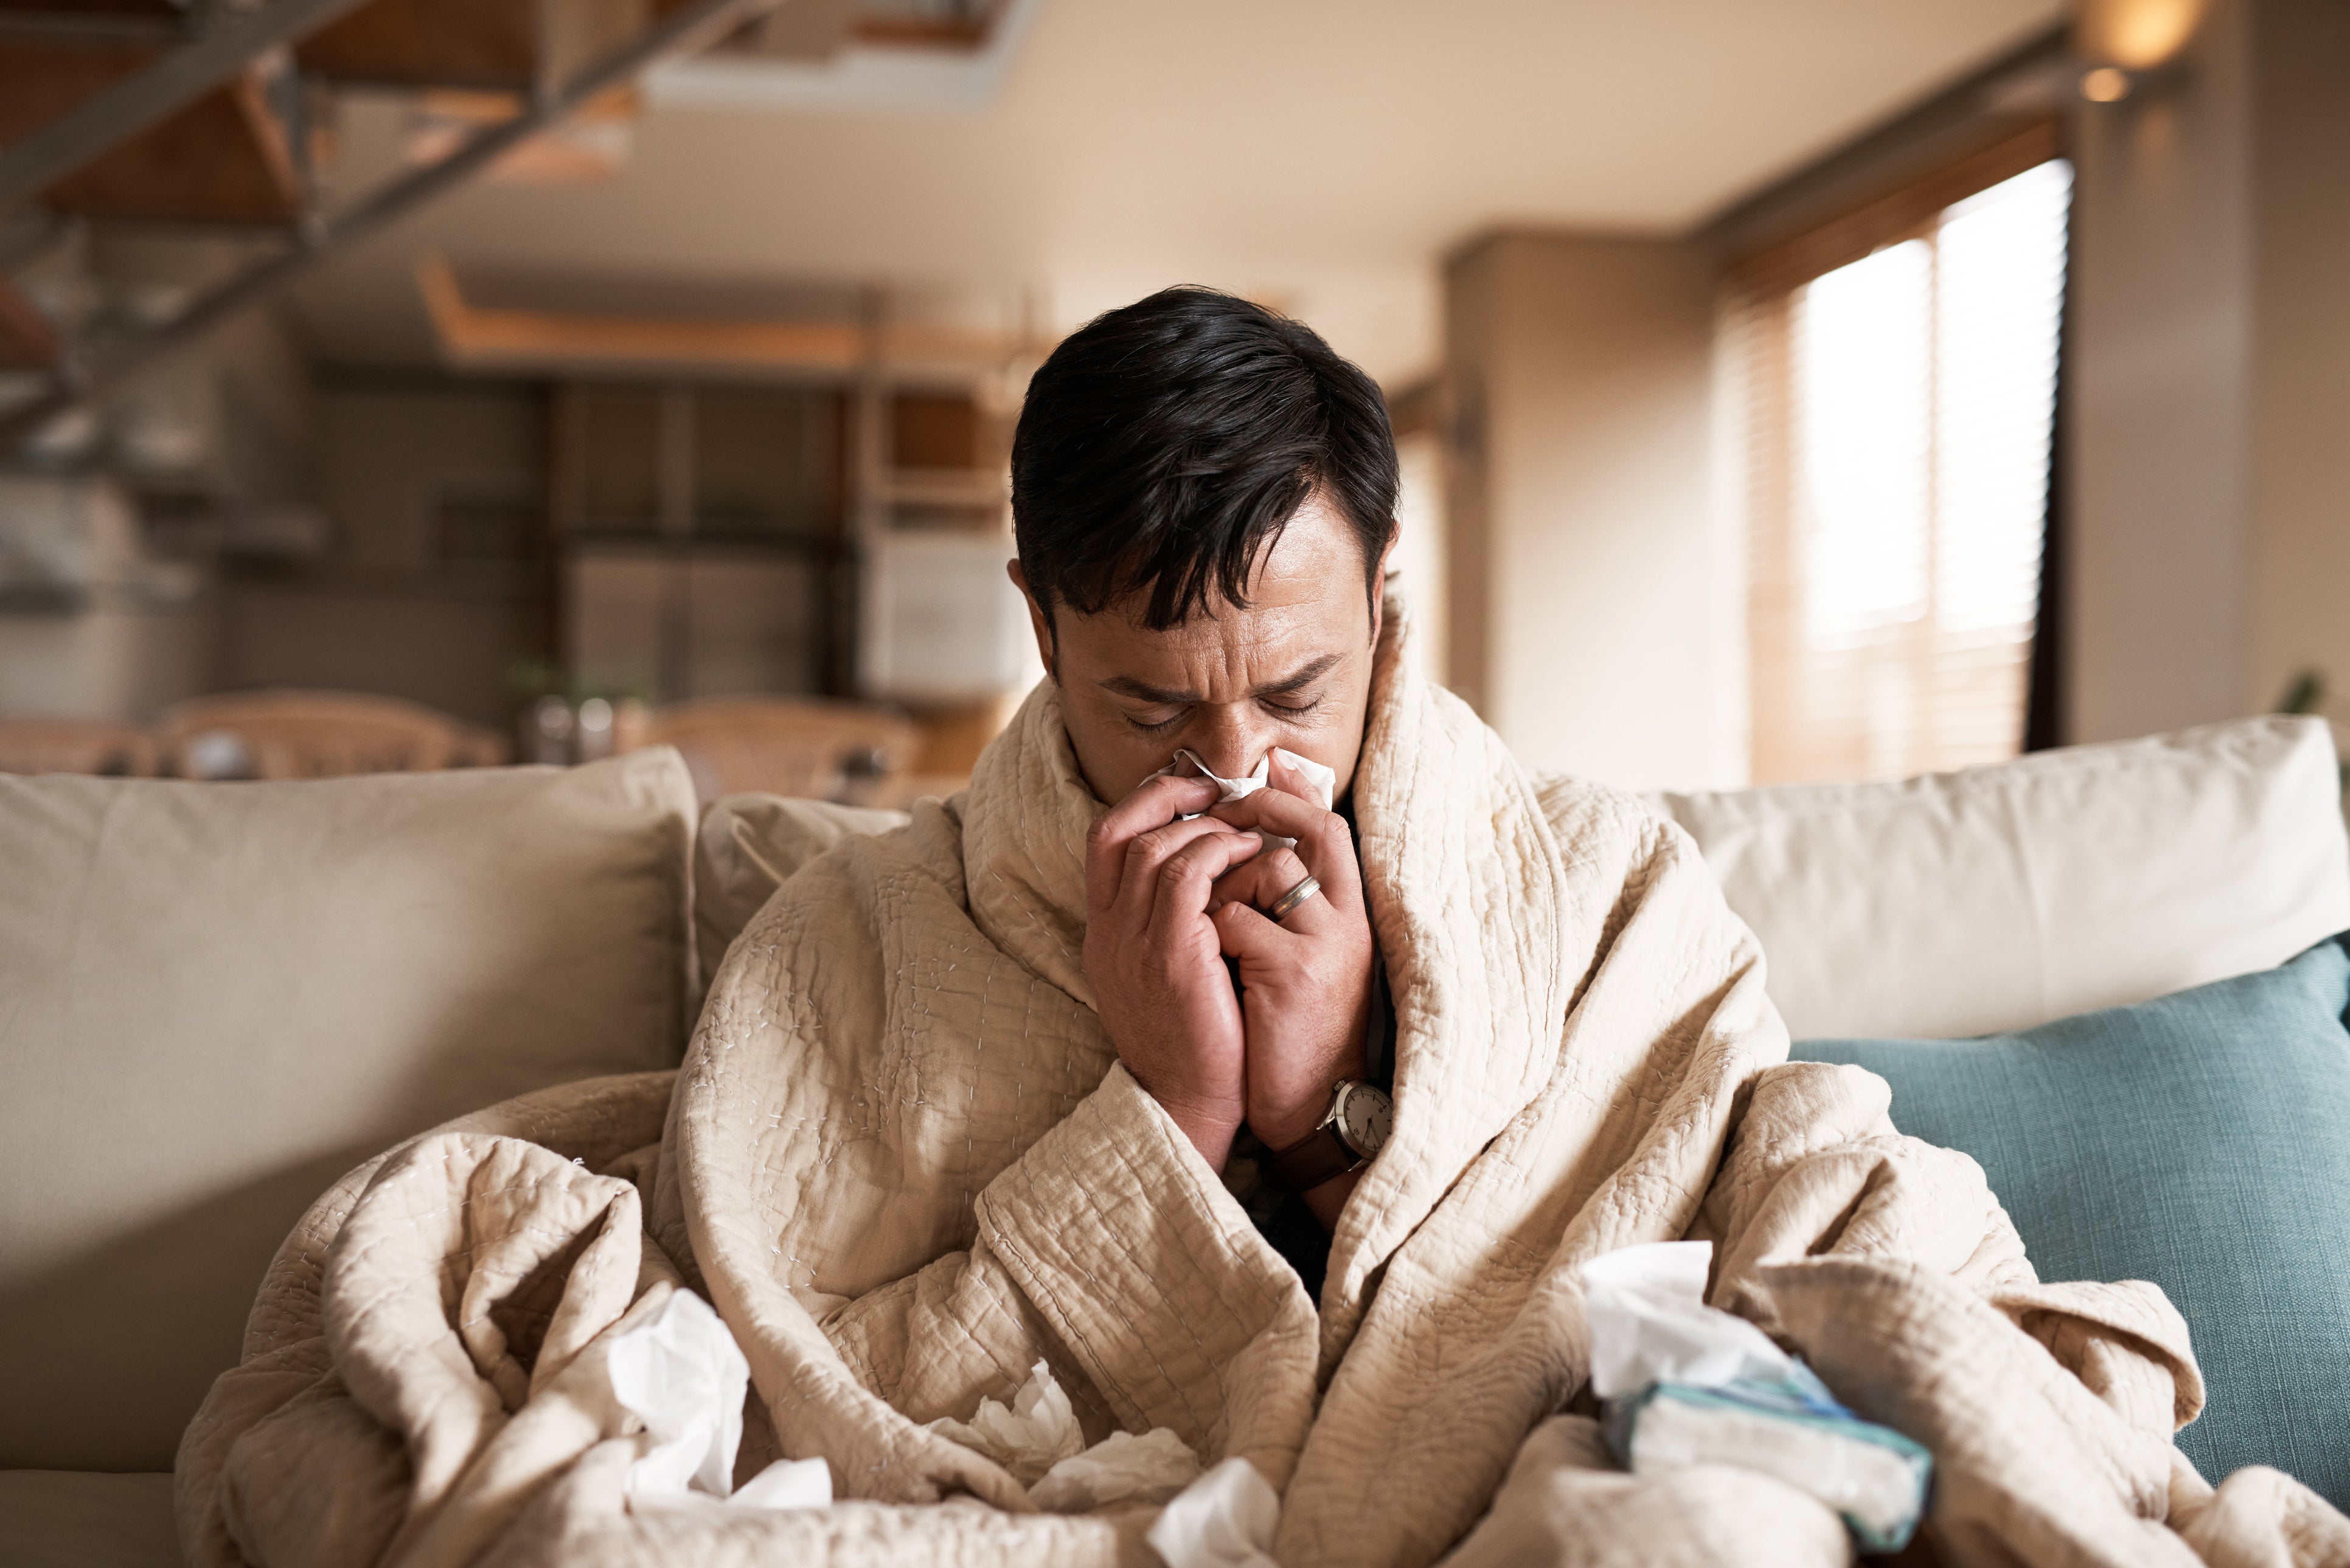 Pneumonia can usually be treated at home